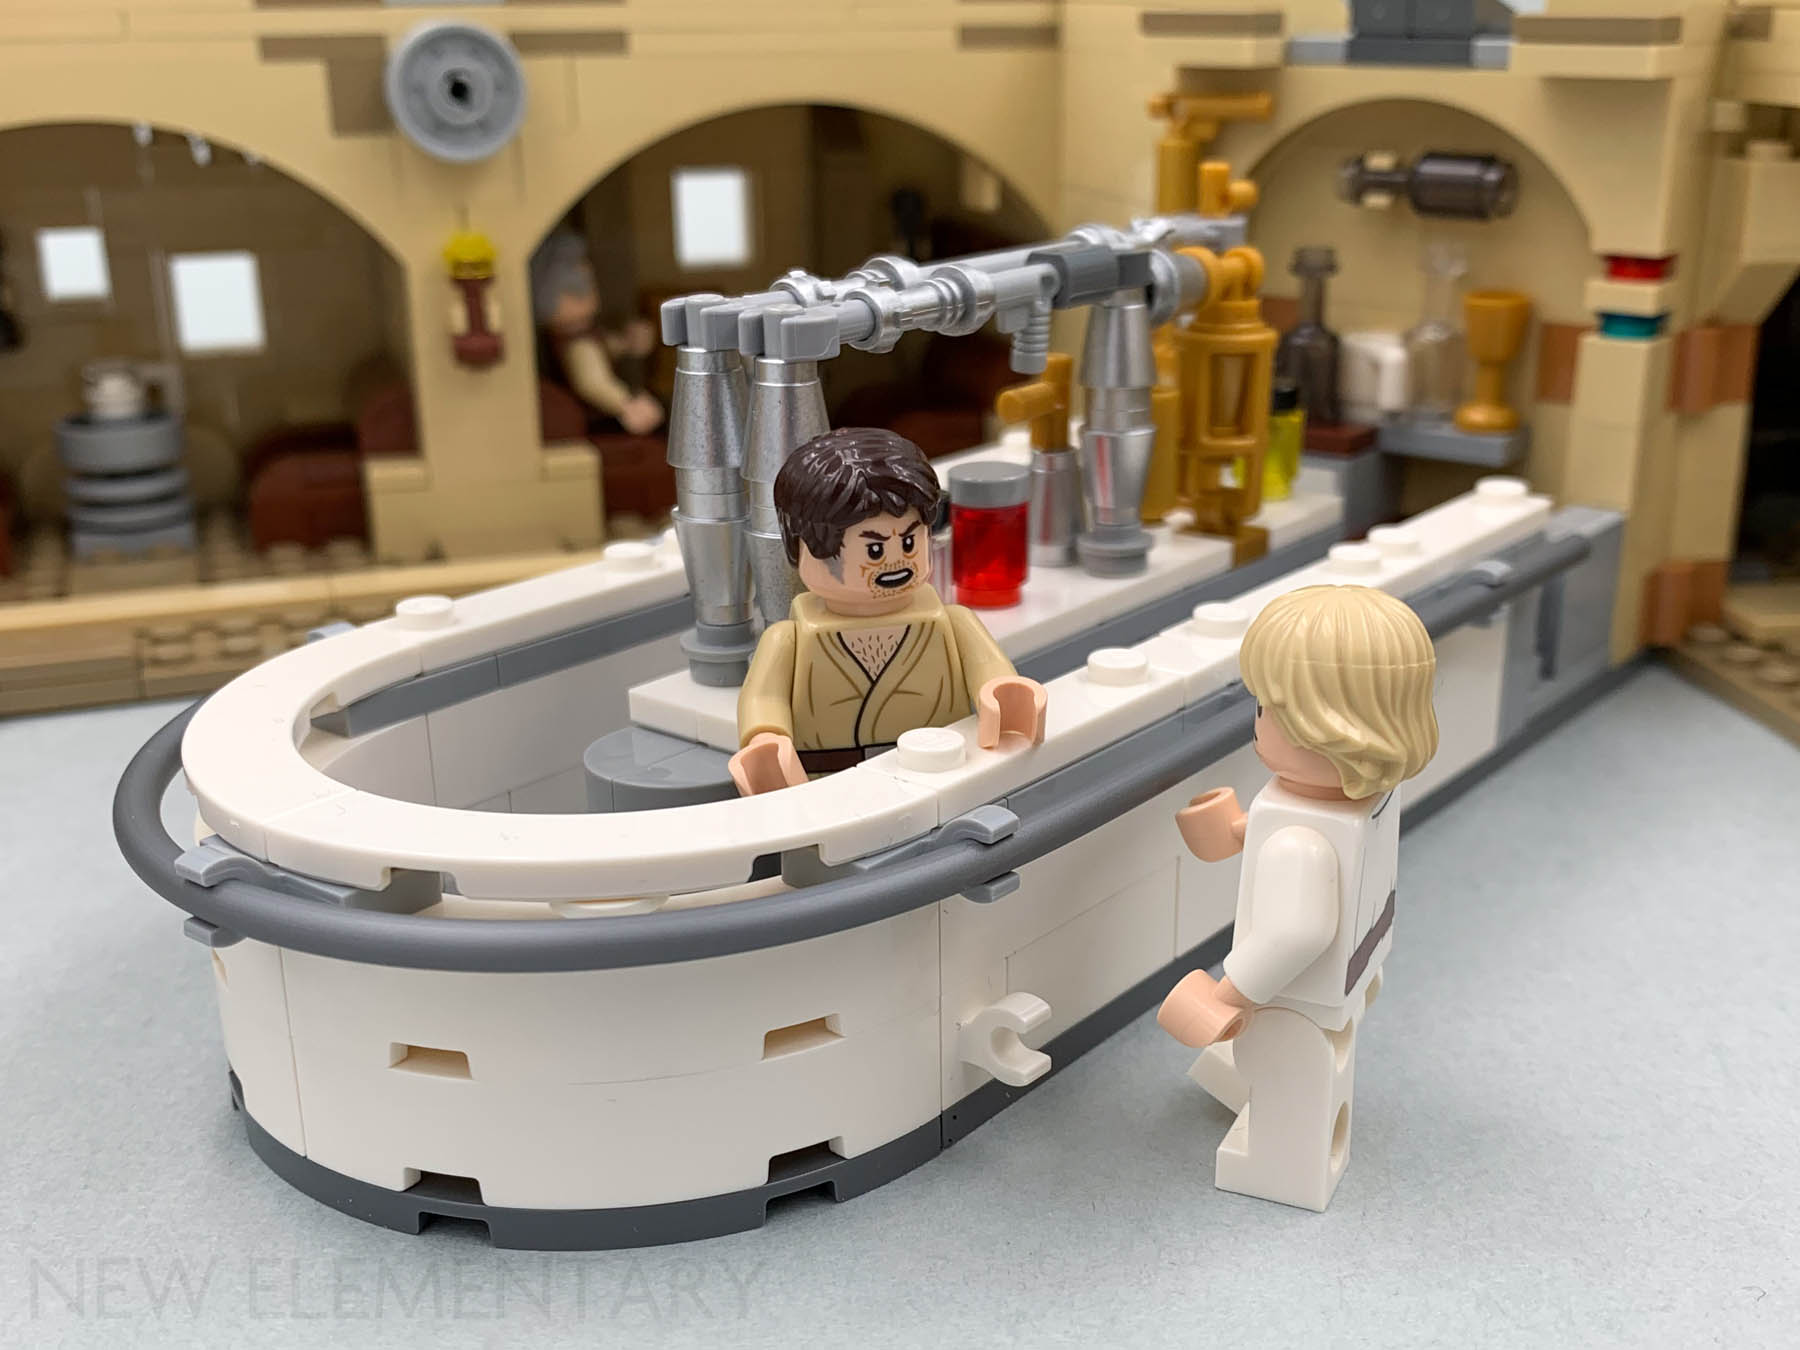 LEGO® Star Wars review: 75290 Mos Eisley Cantina – the build